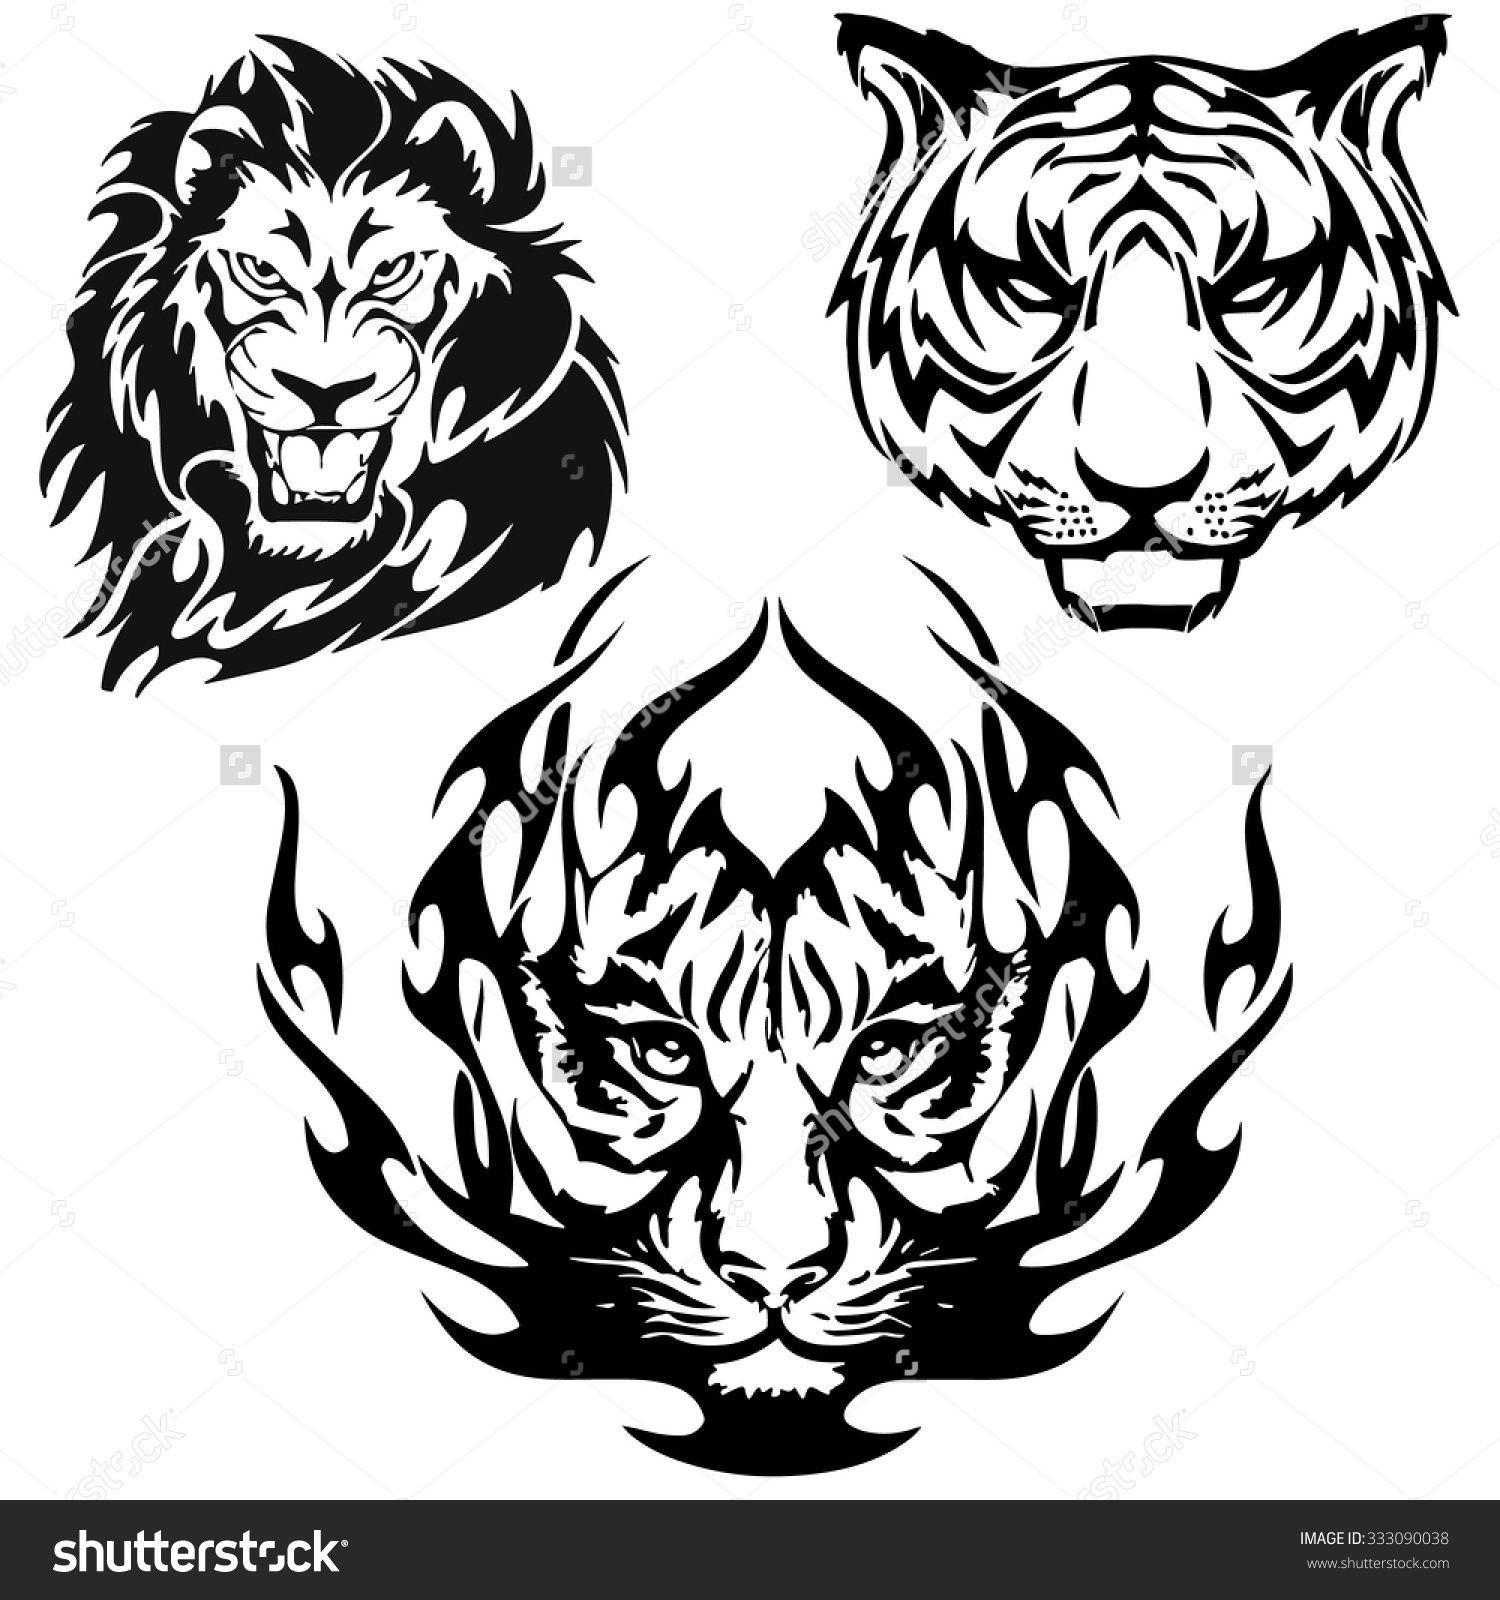 Black and White Tiger Logo - A Lion and Tiger head logo in black and white. | Illustrations ...